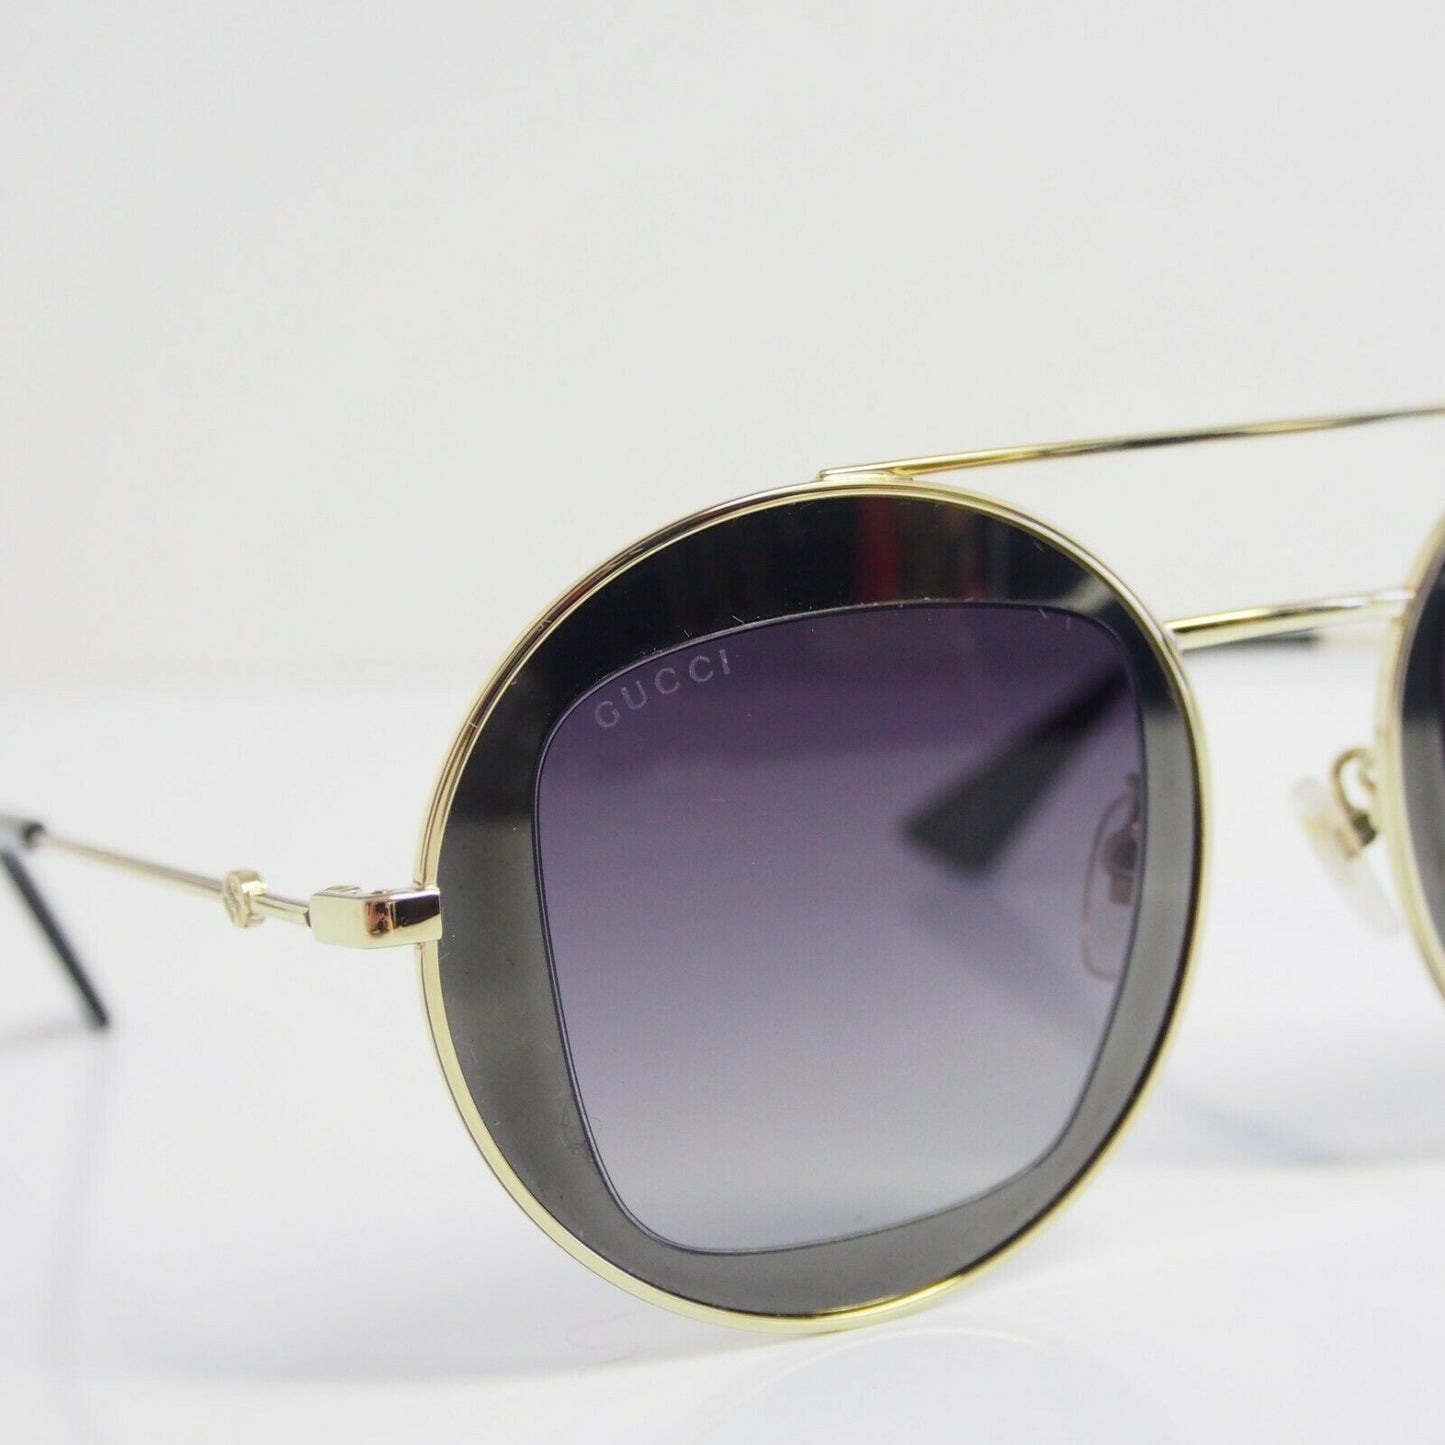 GUCCI THIN FRAME SUNGLASSES WITH CASE